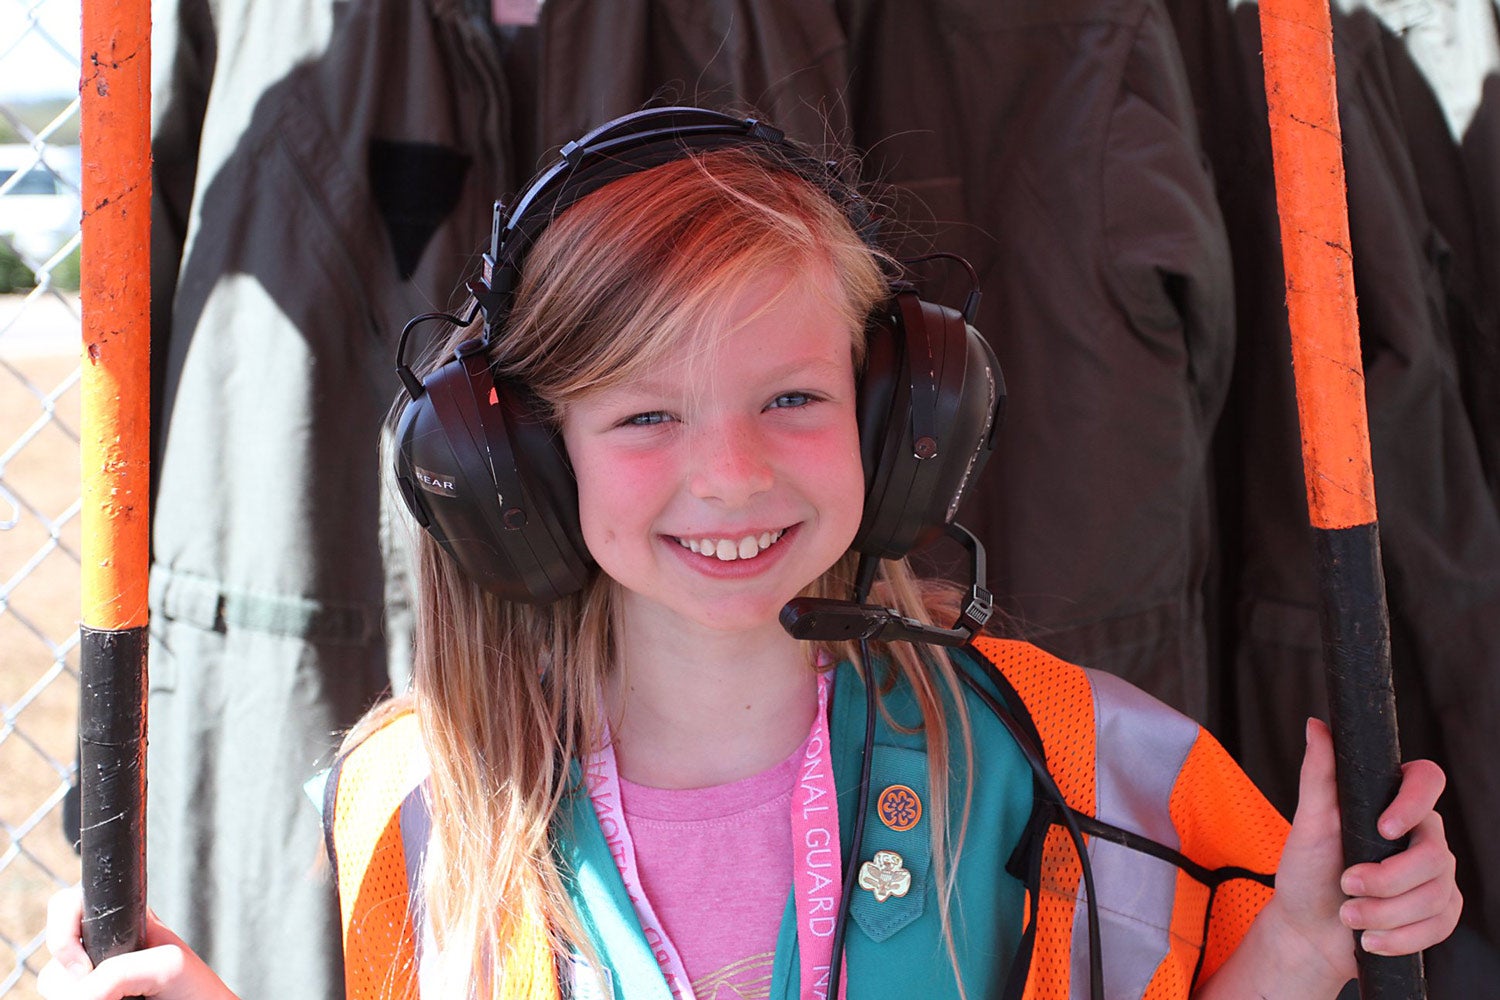 A young girl tries on an aviation headset